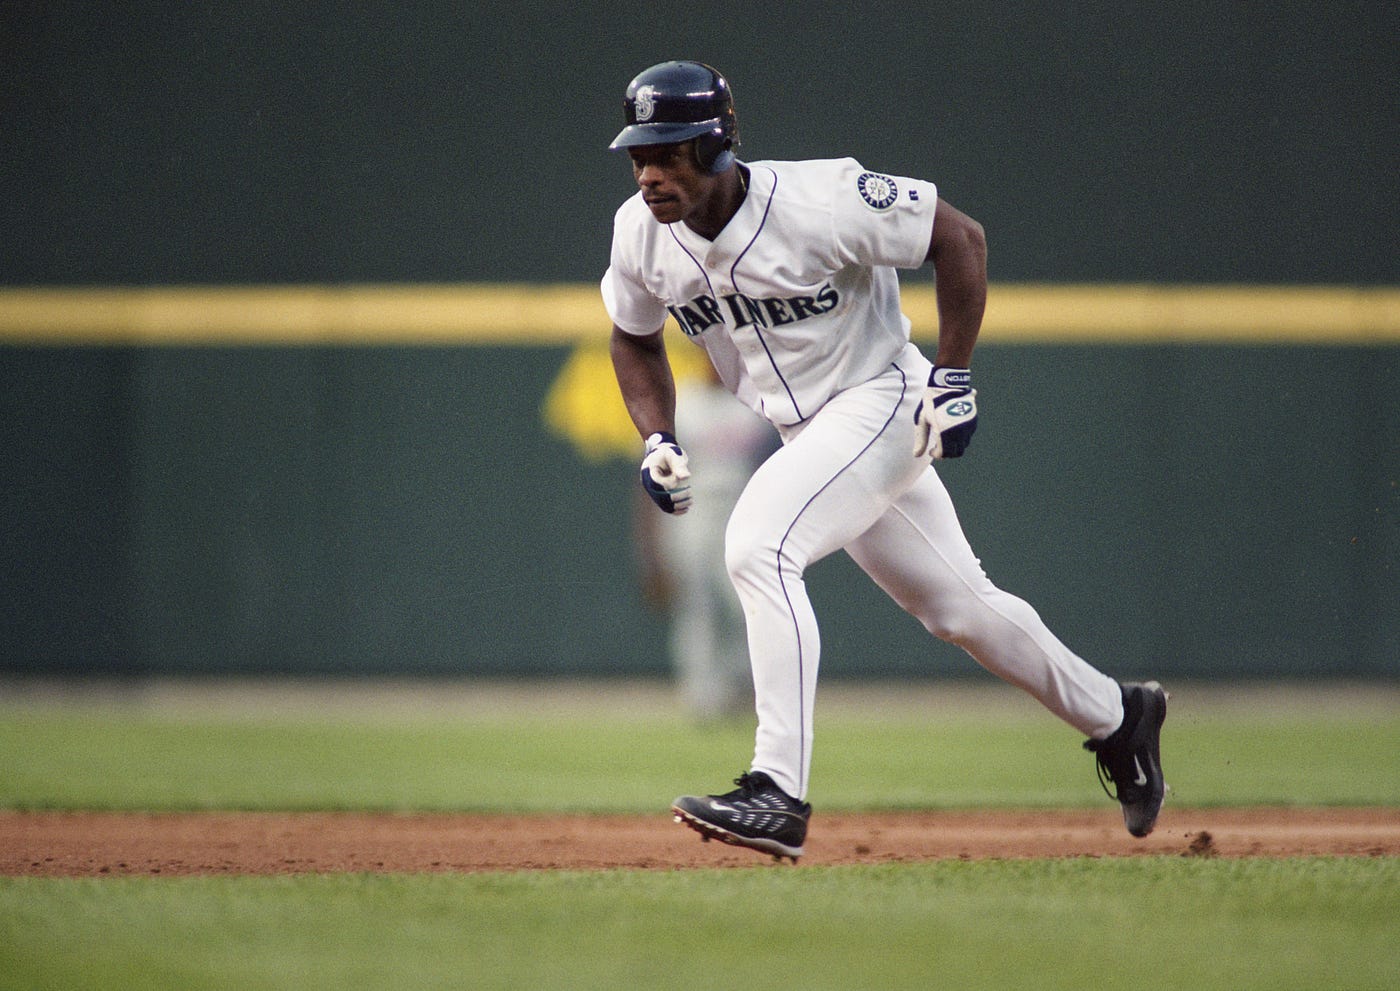 Classic Mariners Games: Rickey Henderson's Mariners Debut, by Mariners PR